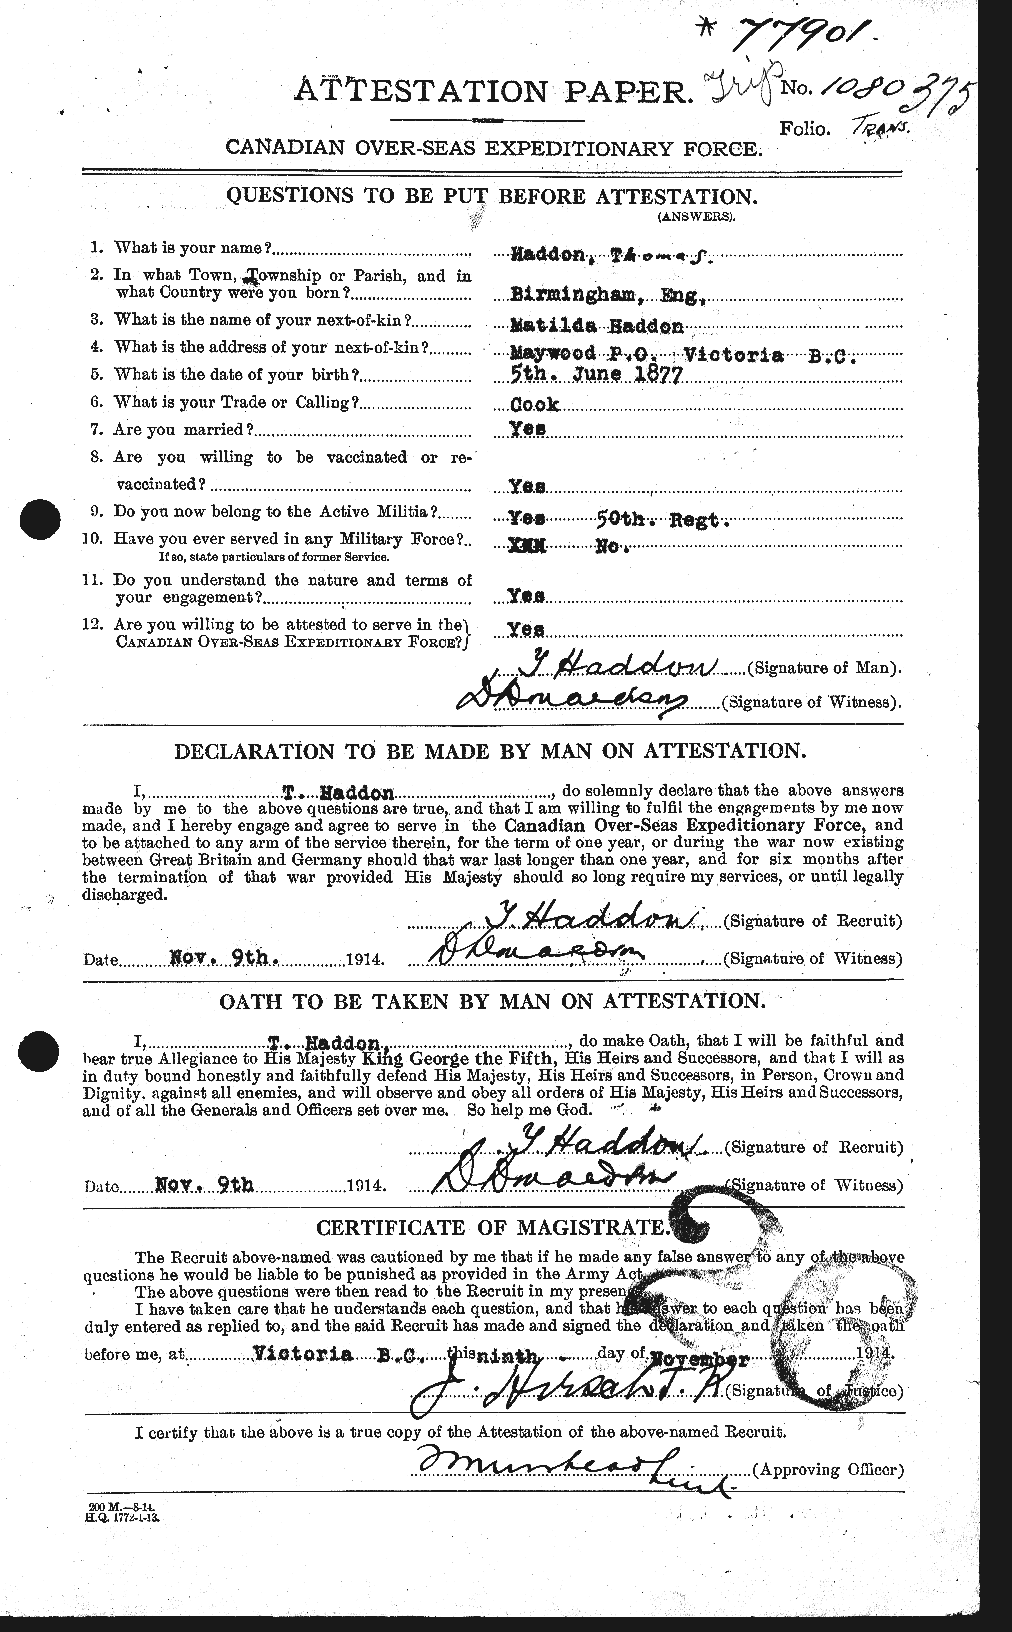 Personnel Records of the First World War - CEF 368767a